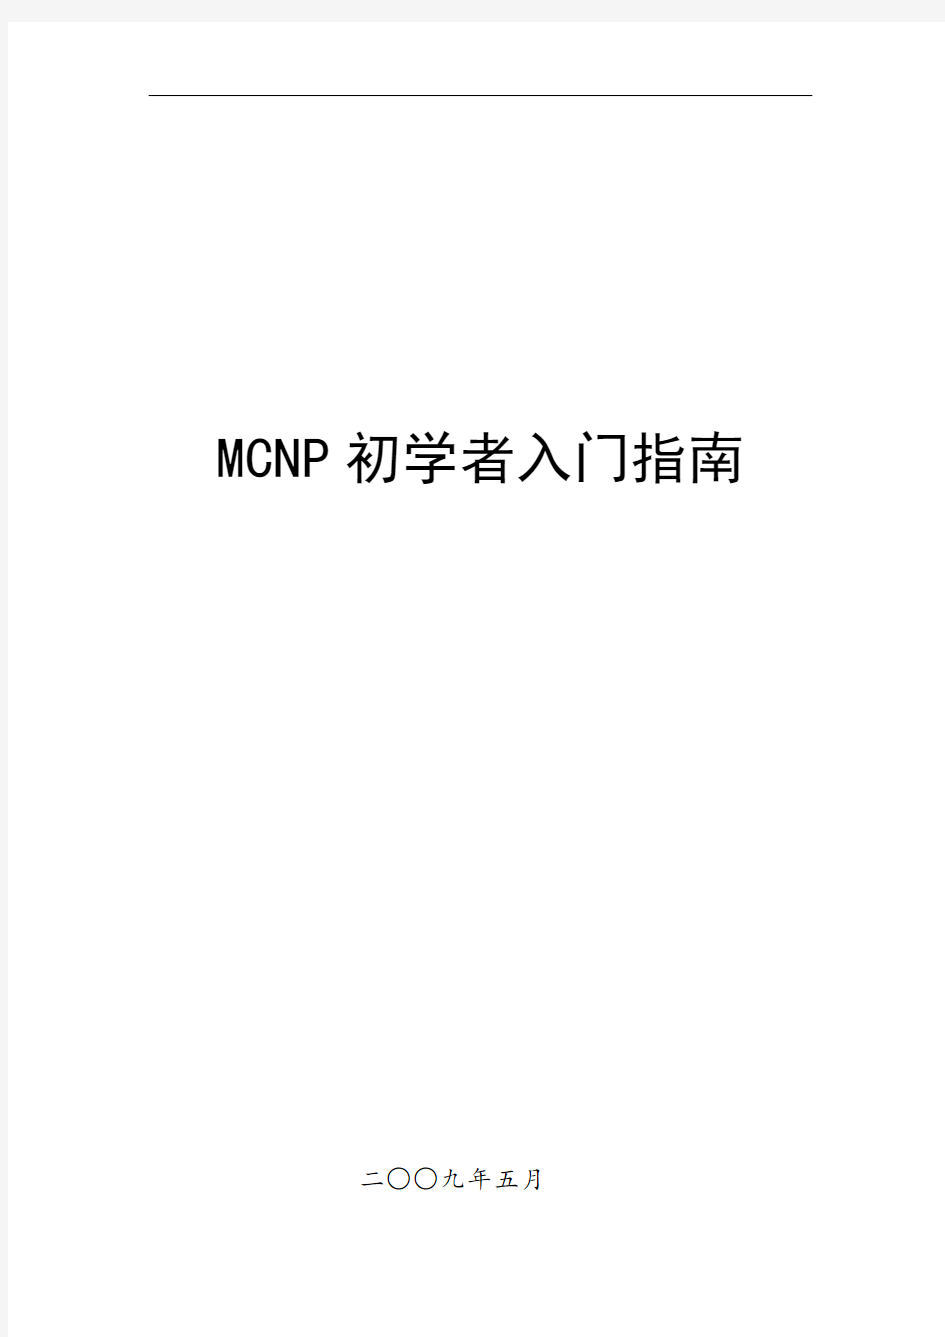 MCNP初学者入门指南